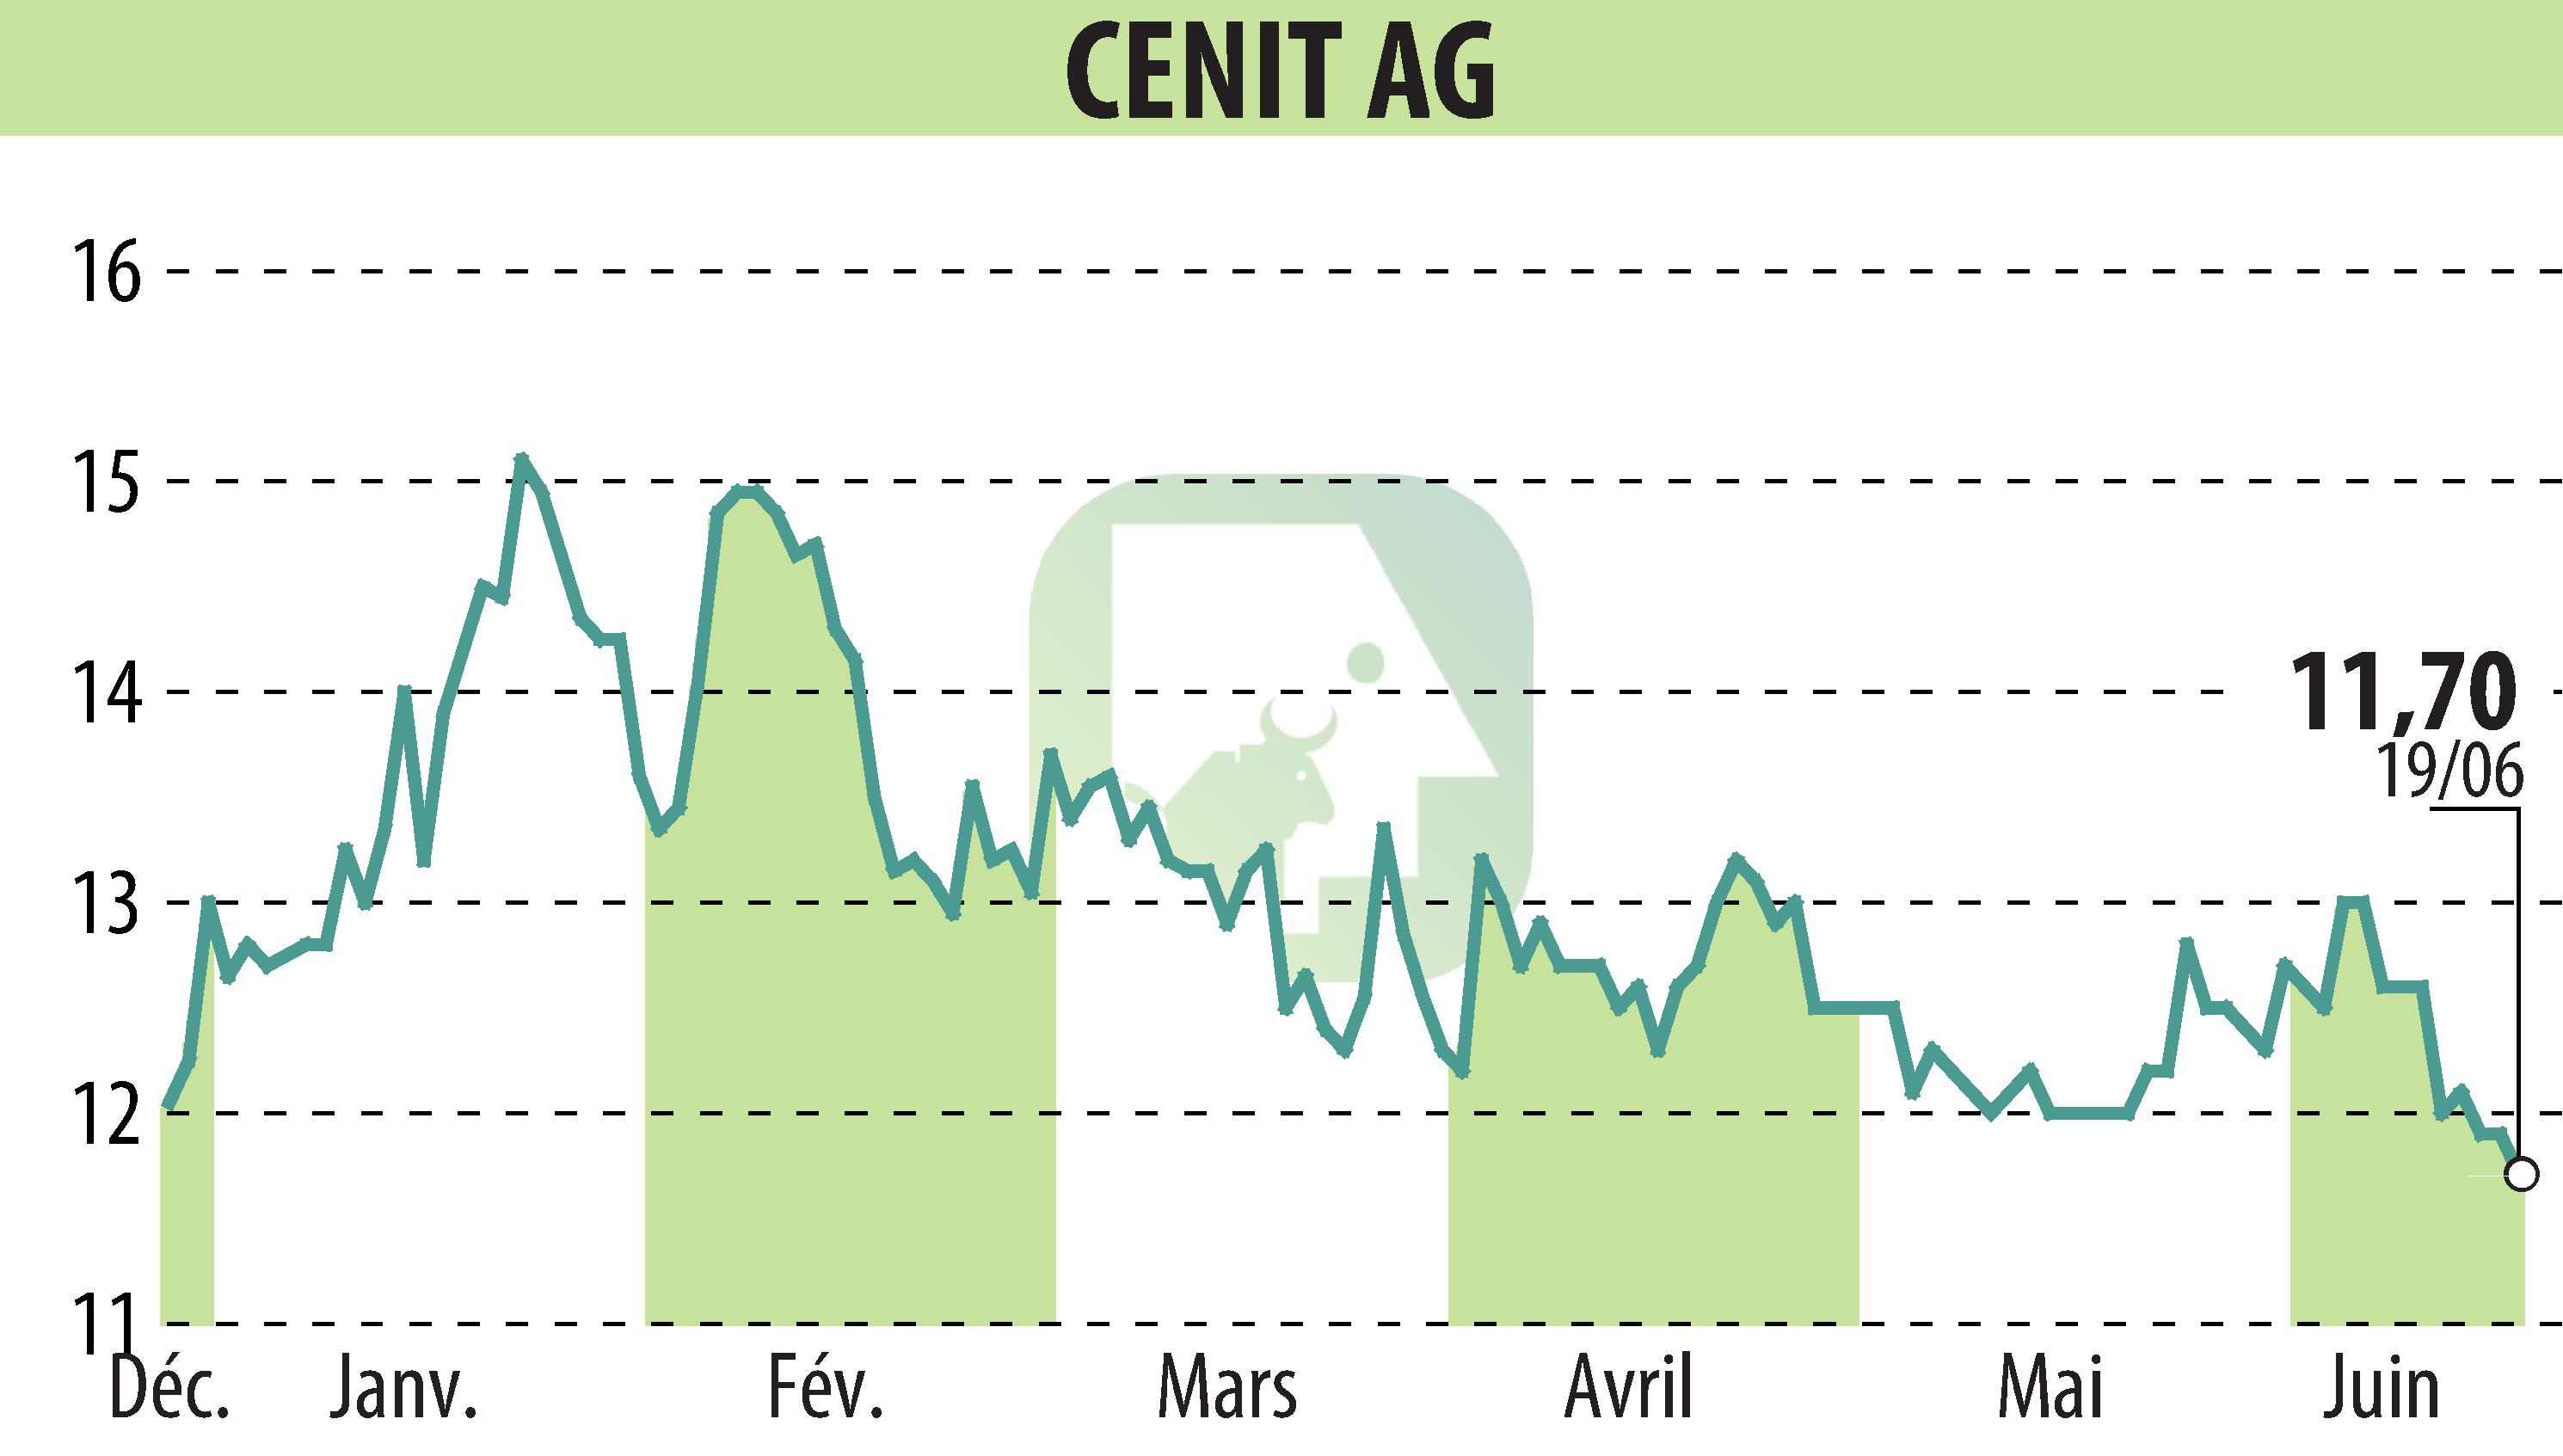 Stock price chart of CENIT AG (EBR:CSH) showing fluctuations.